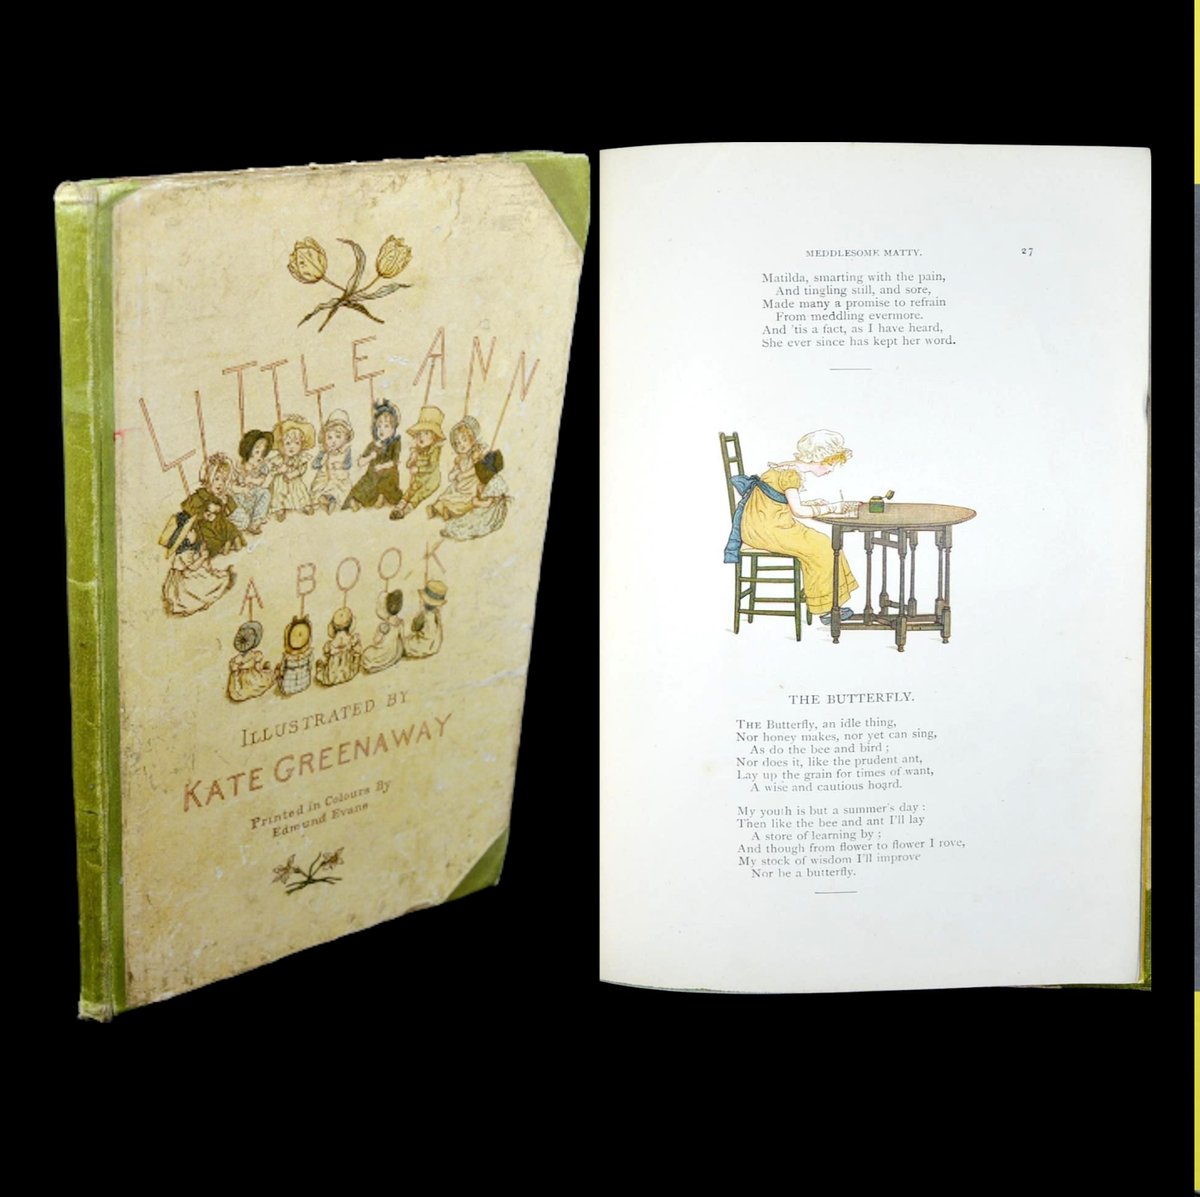 Kate Greenaway: LITTLE ANN AND OTHER POEMS By Jane & Ann Taylor. First edition, 1883

Auktionen på Tradera: tradera.com/item/341208/61…

#KateGreenaway #LittleAnnandOtherPoems #JaneTaylor #AnnTaylor